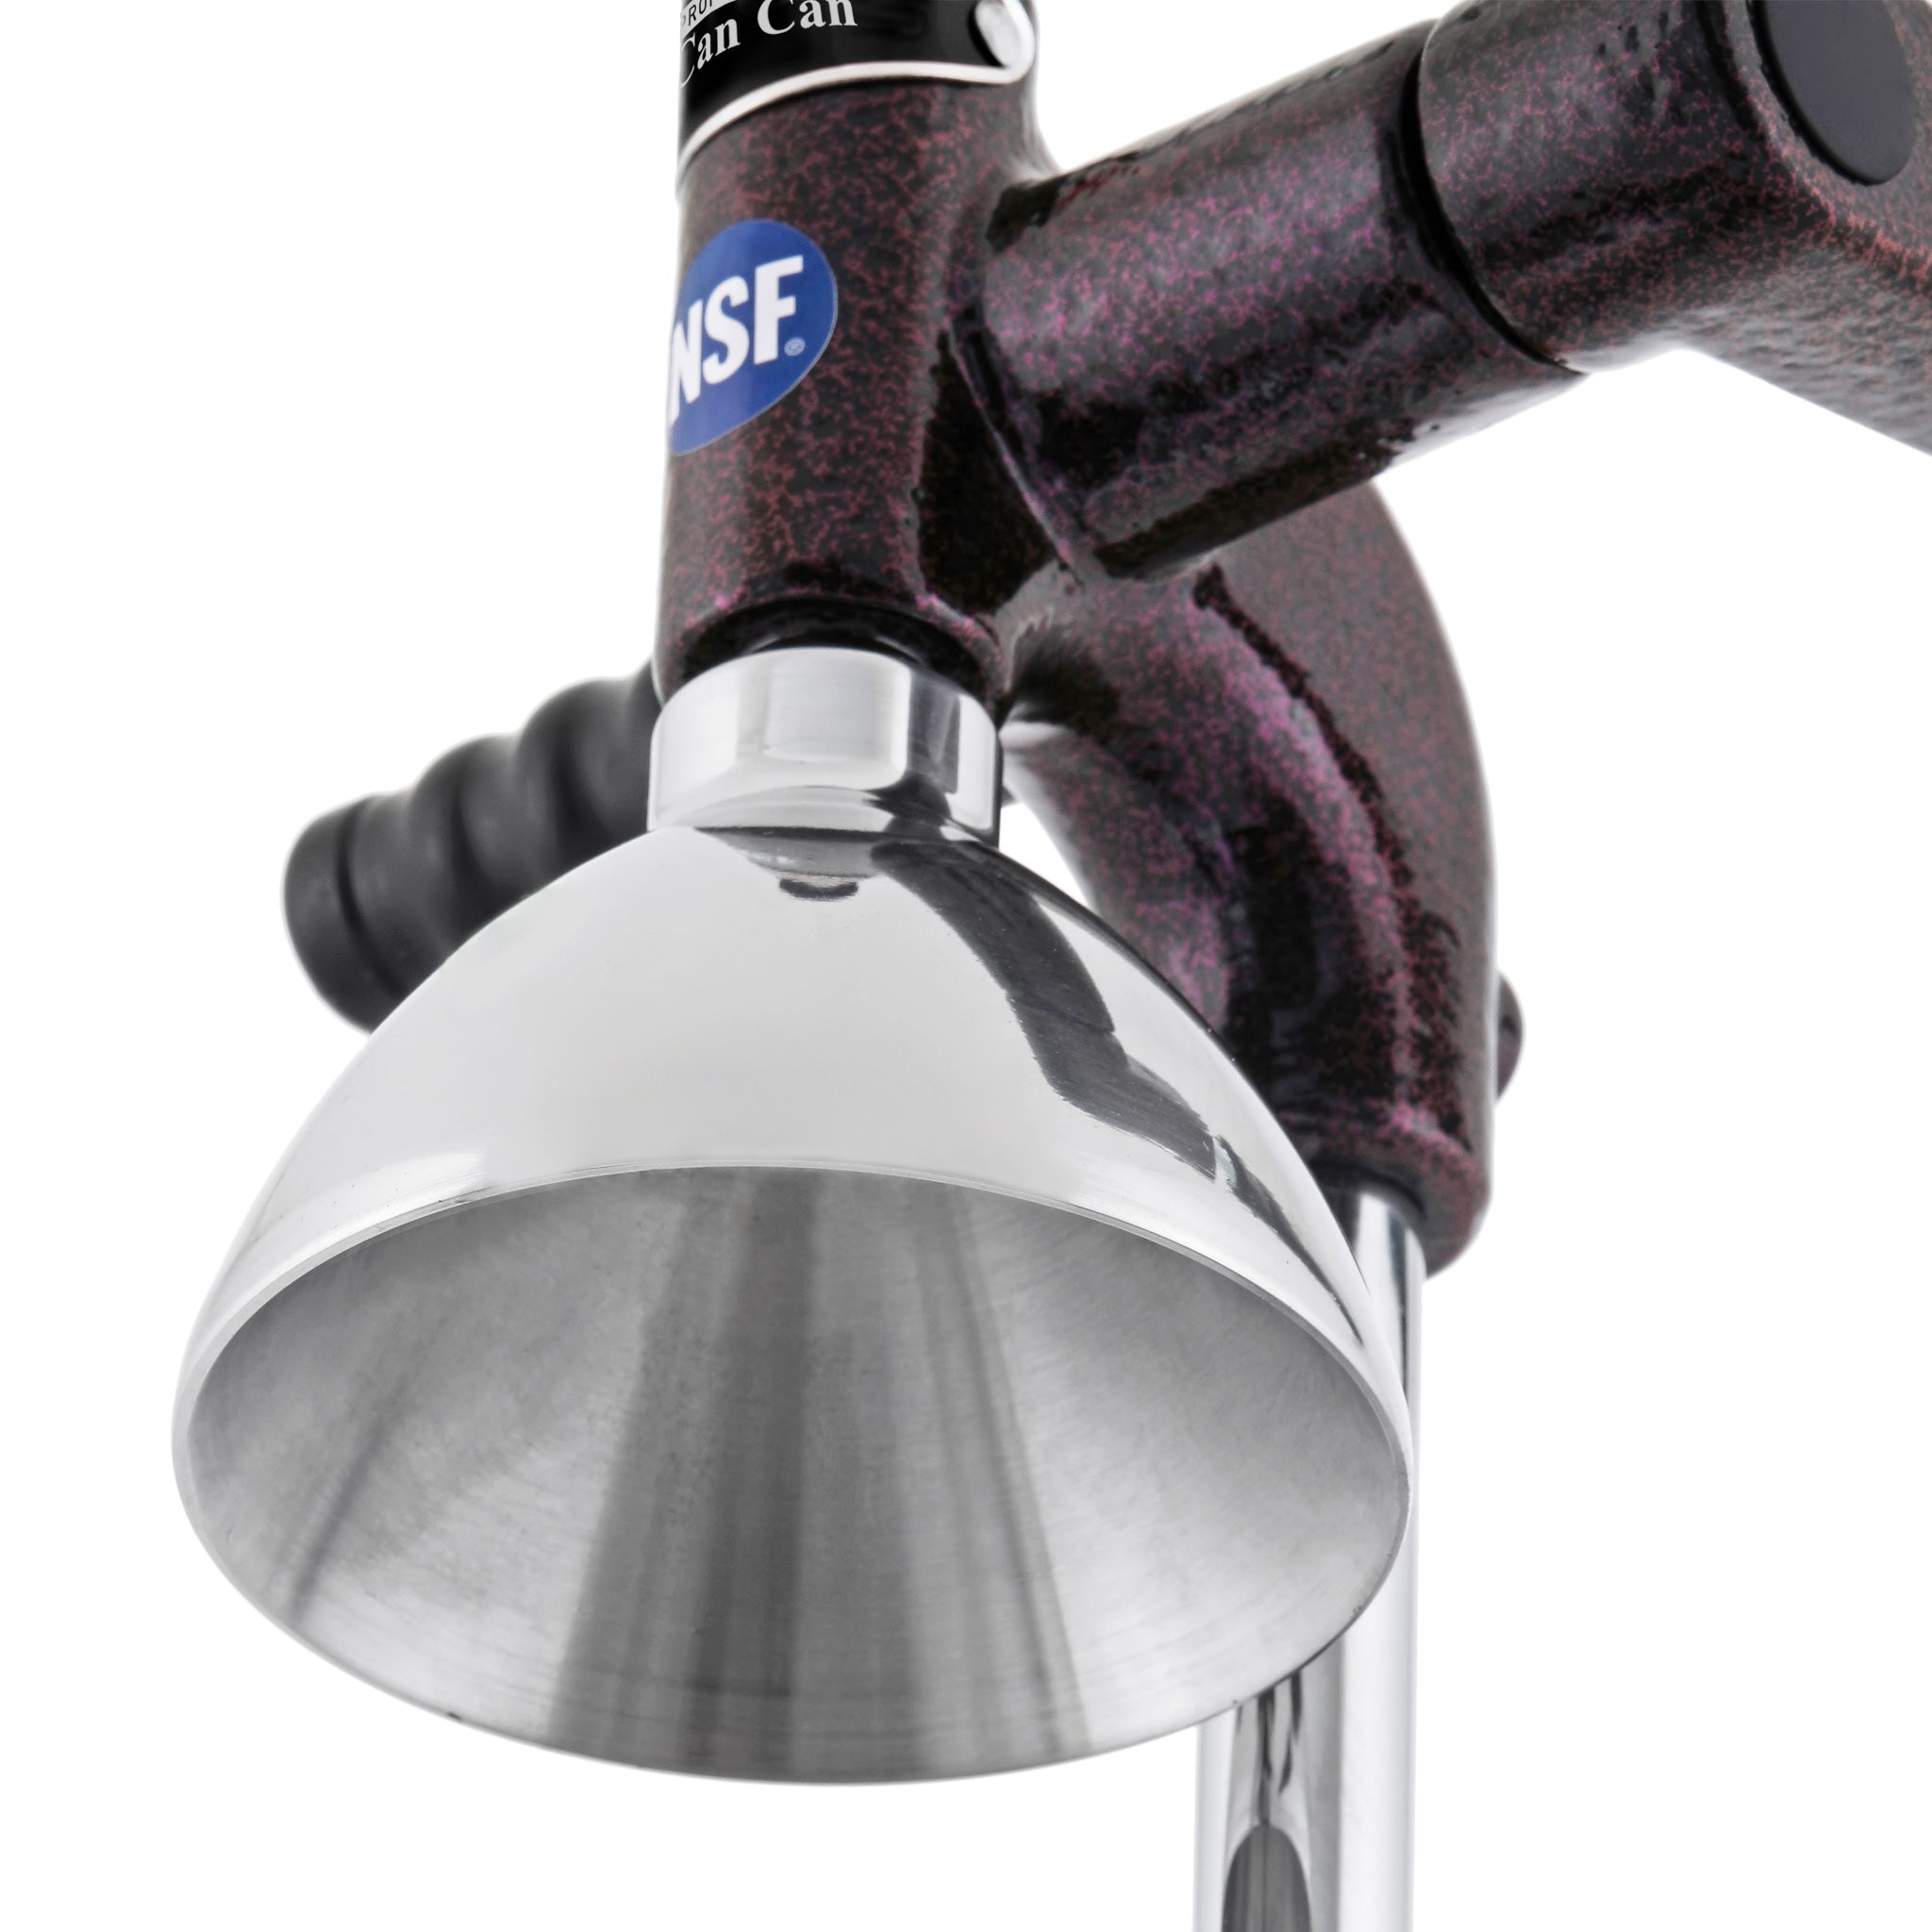 Tribest Professional XL Manual Juice Press for Pomegranate and Citrus MJP-105 in Purple